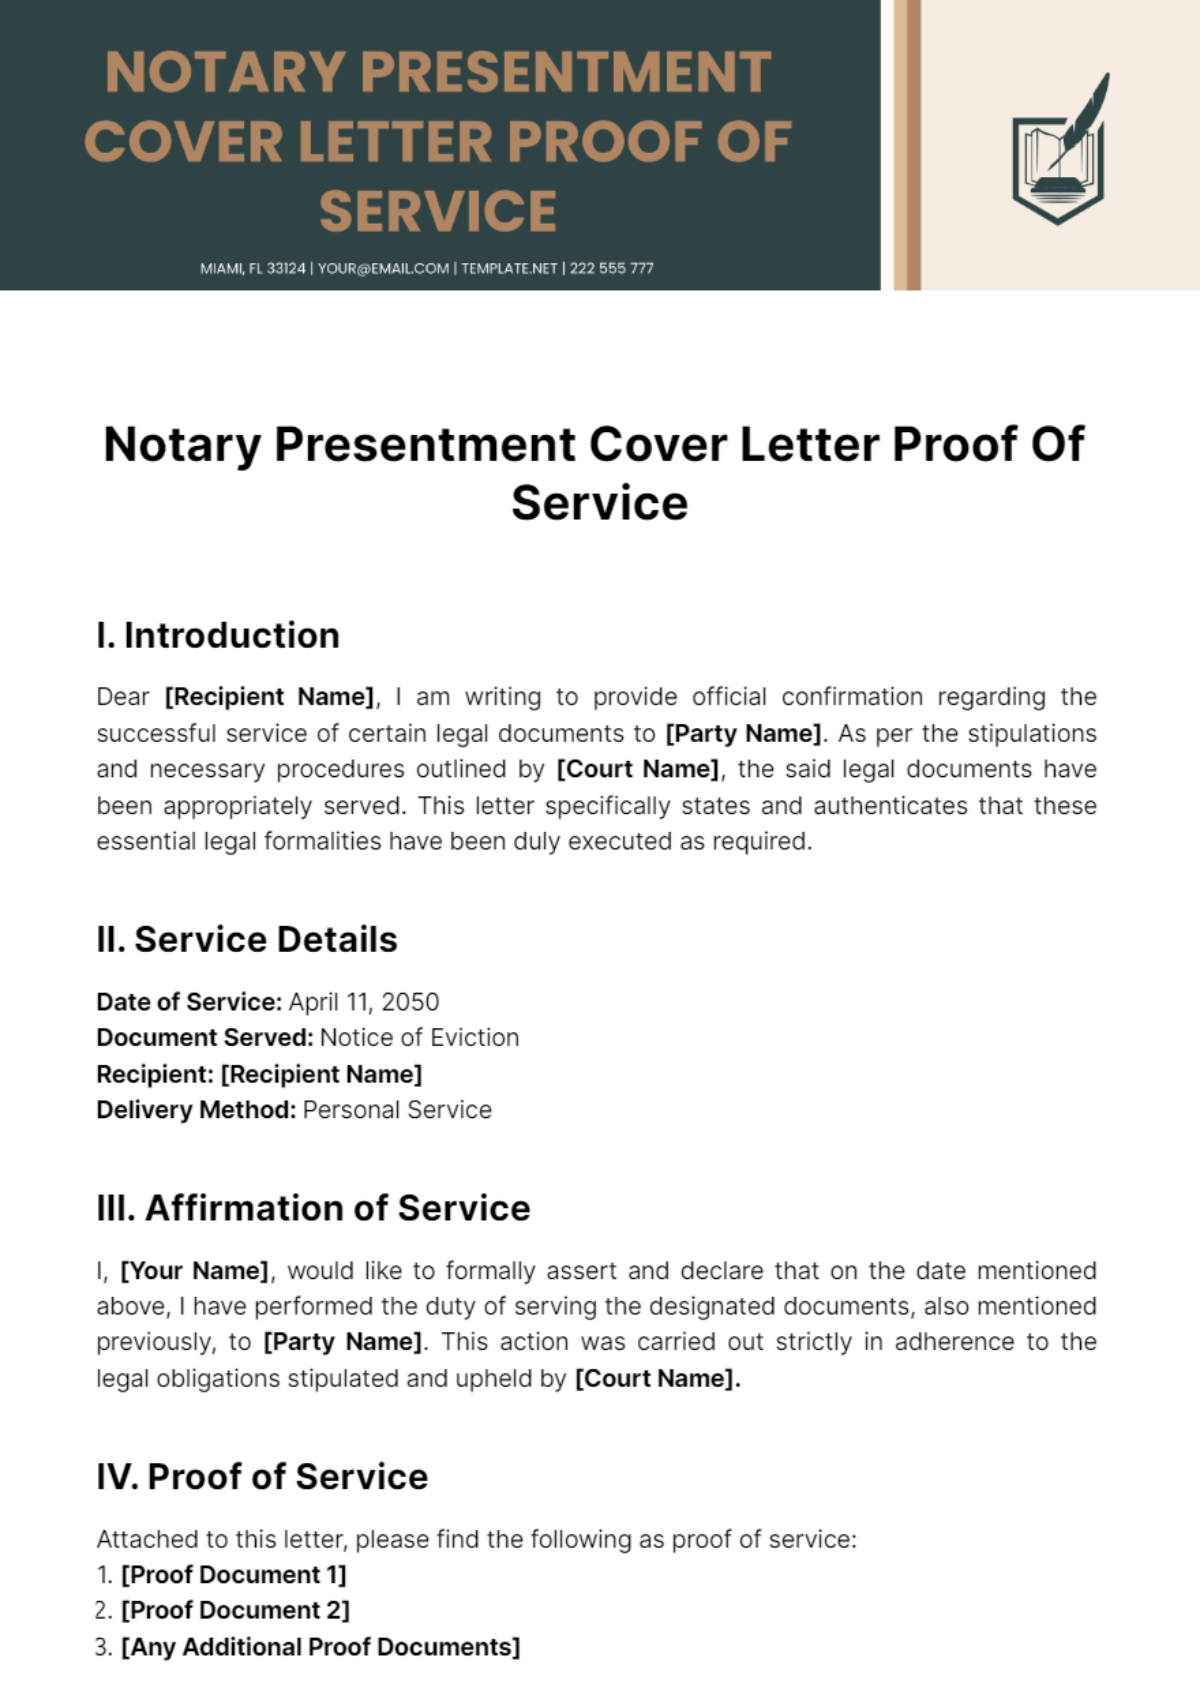 Notary Presentment Cover Letter Proof Of Service Template